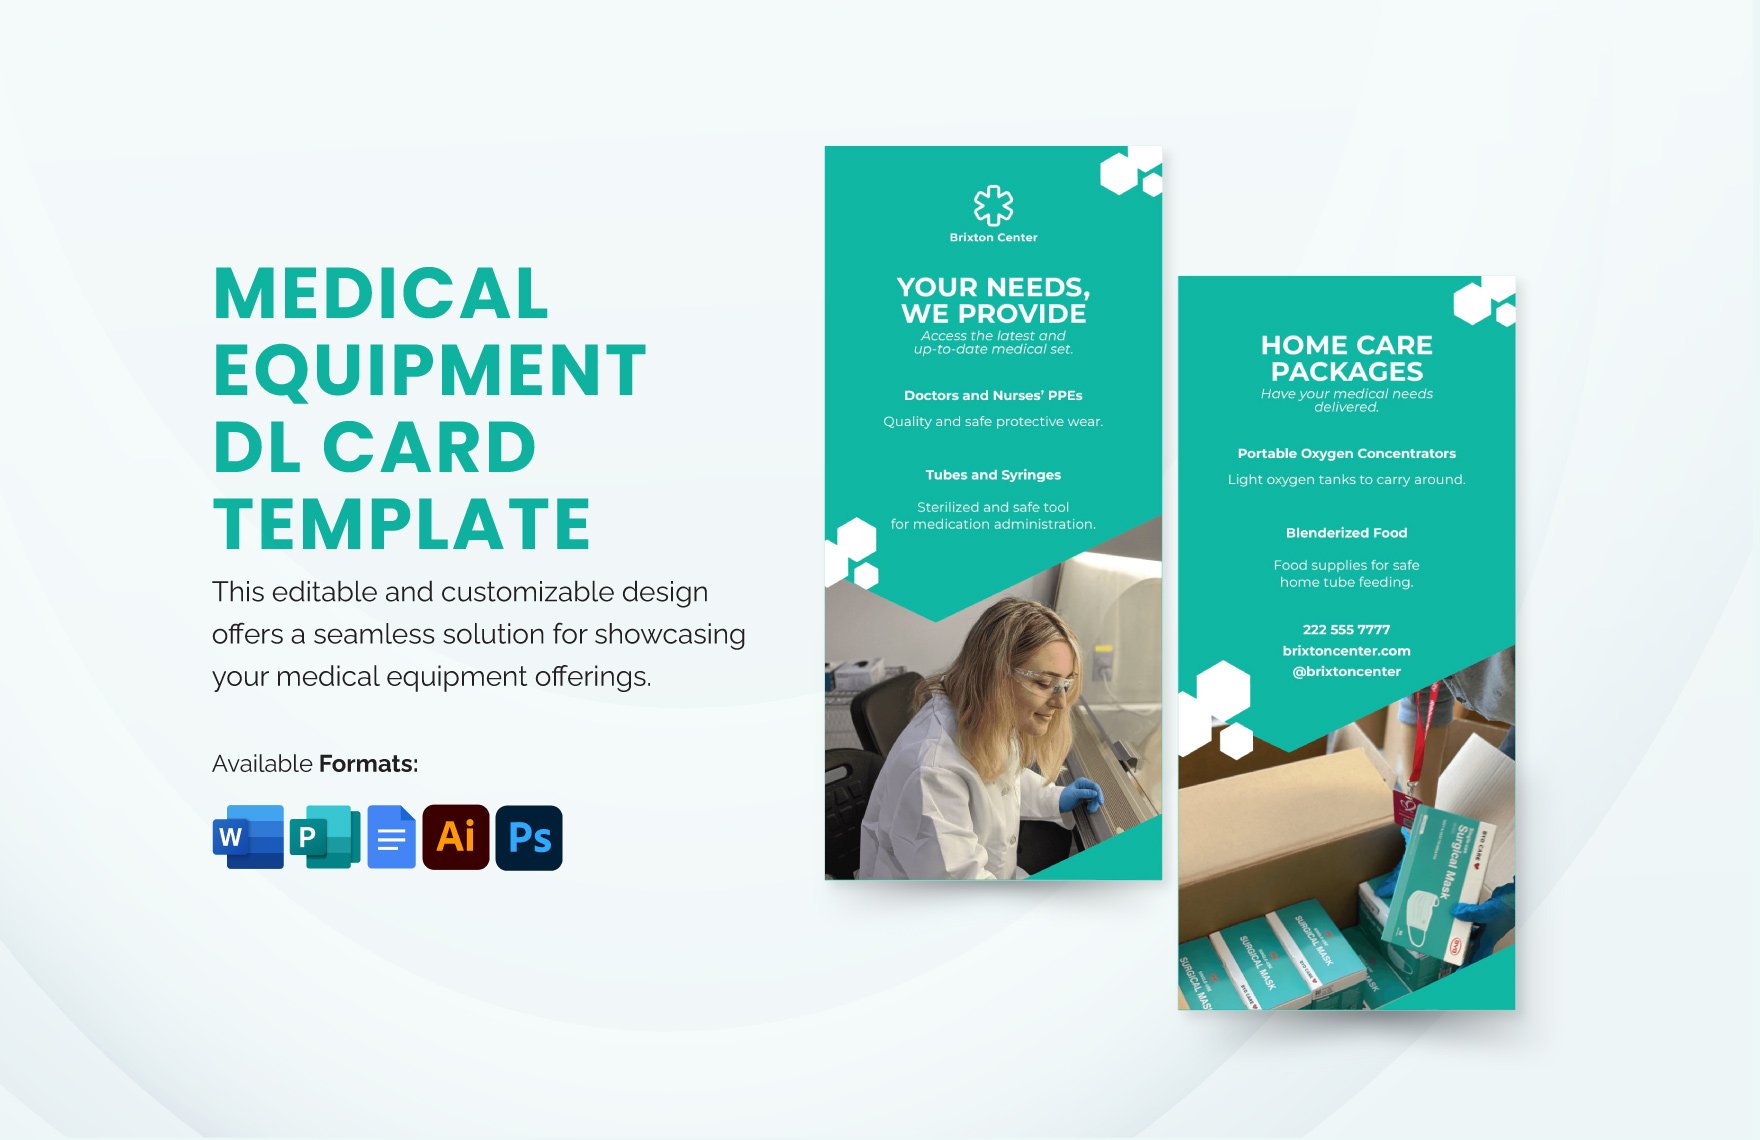 Medical Equipment DL Card Template